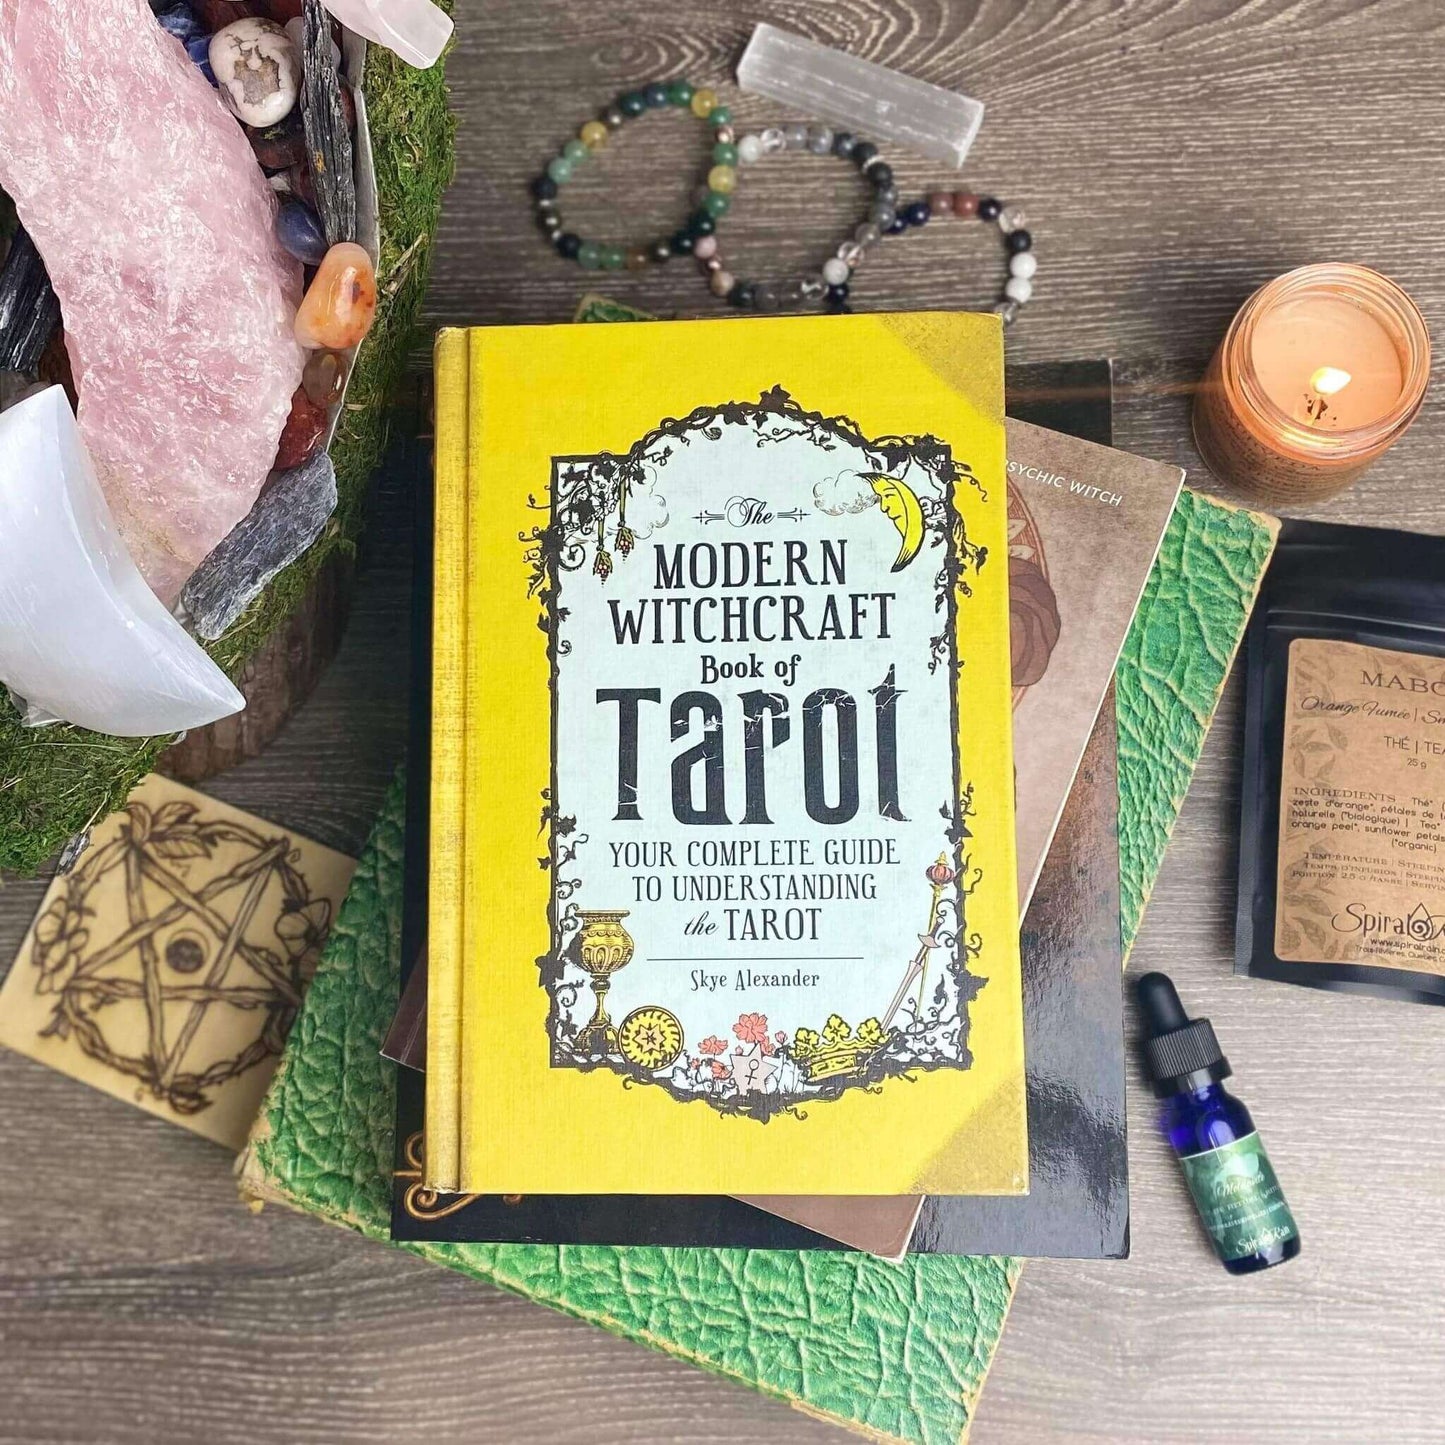 The Modern Witchcraft Book of Tarot: Your Complete Guide to Understanding the Tarot at $21.99 only from Spiral Rain